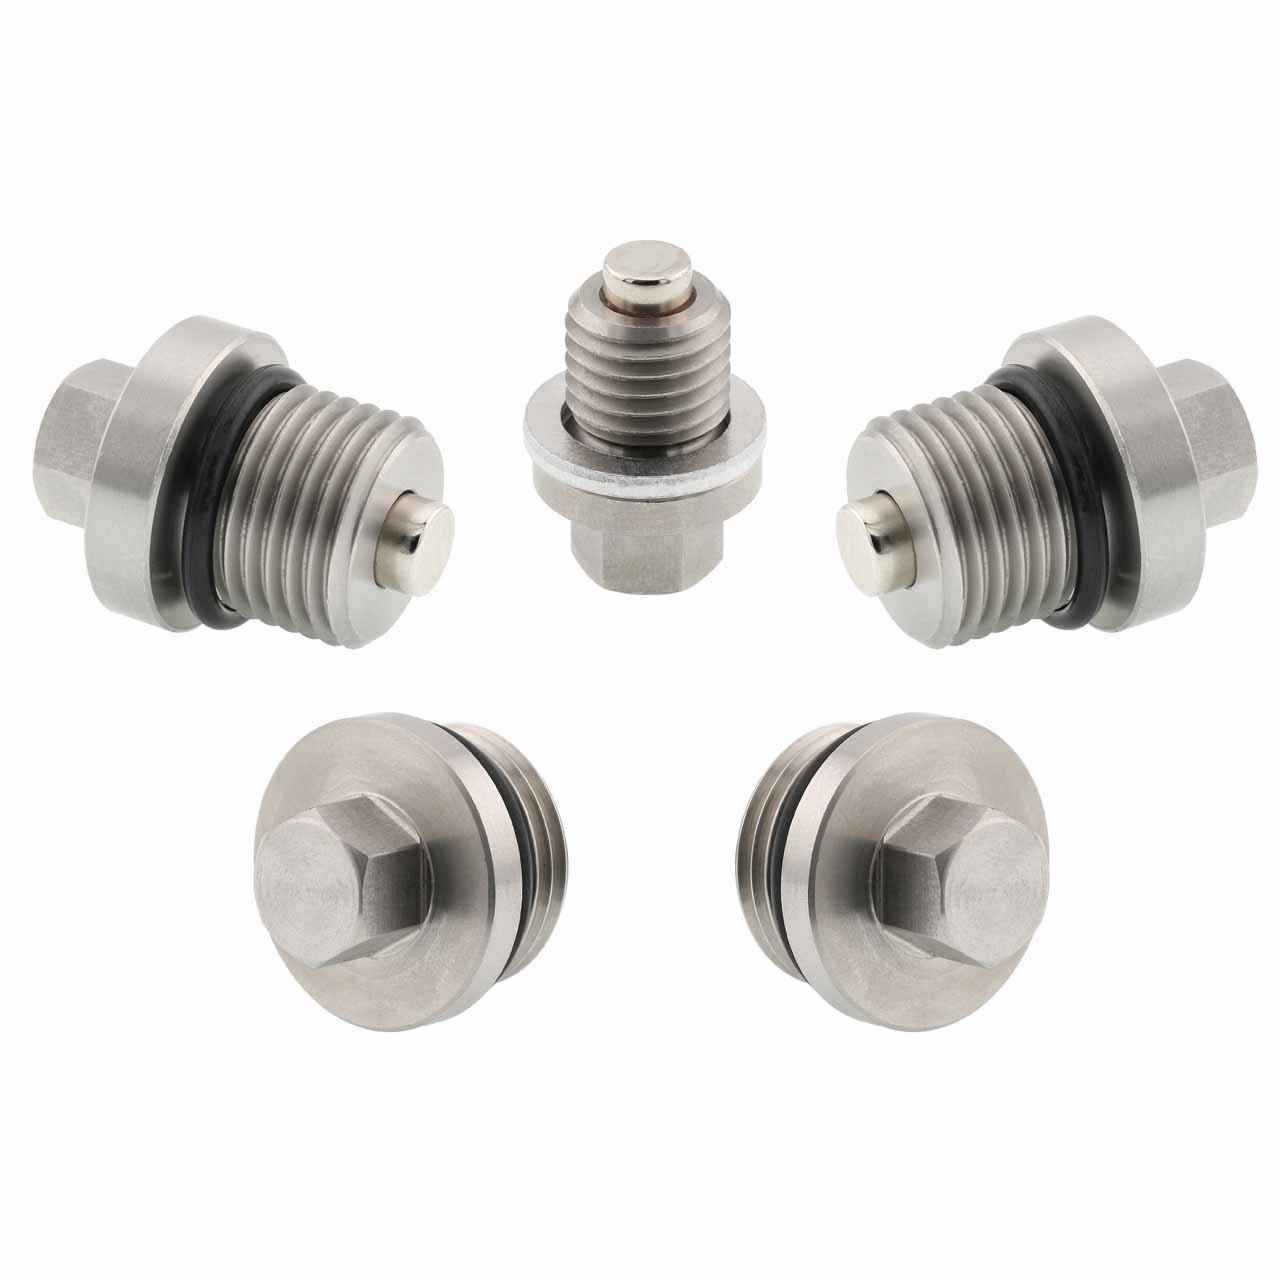 Polaris Ranger XP 1000 Magnetic Oil Drain Plug Kit - 2017-2023 - Engine, Transmission, Differential - Made In USA